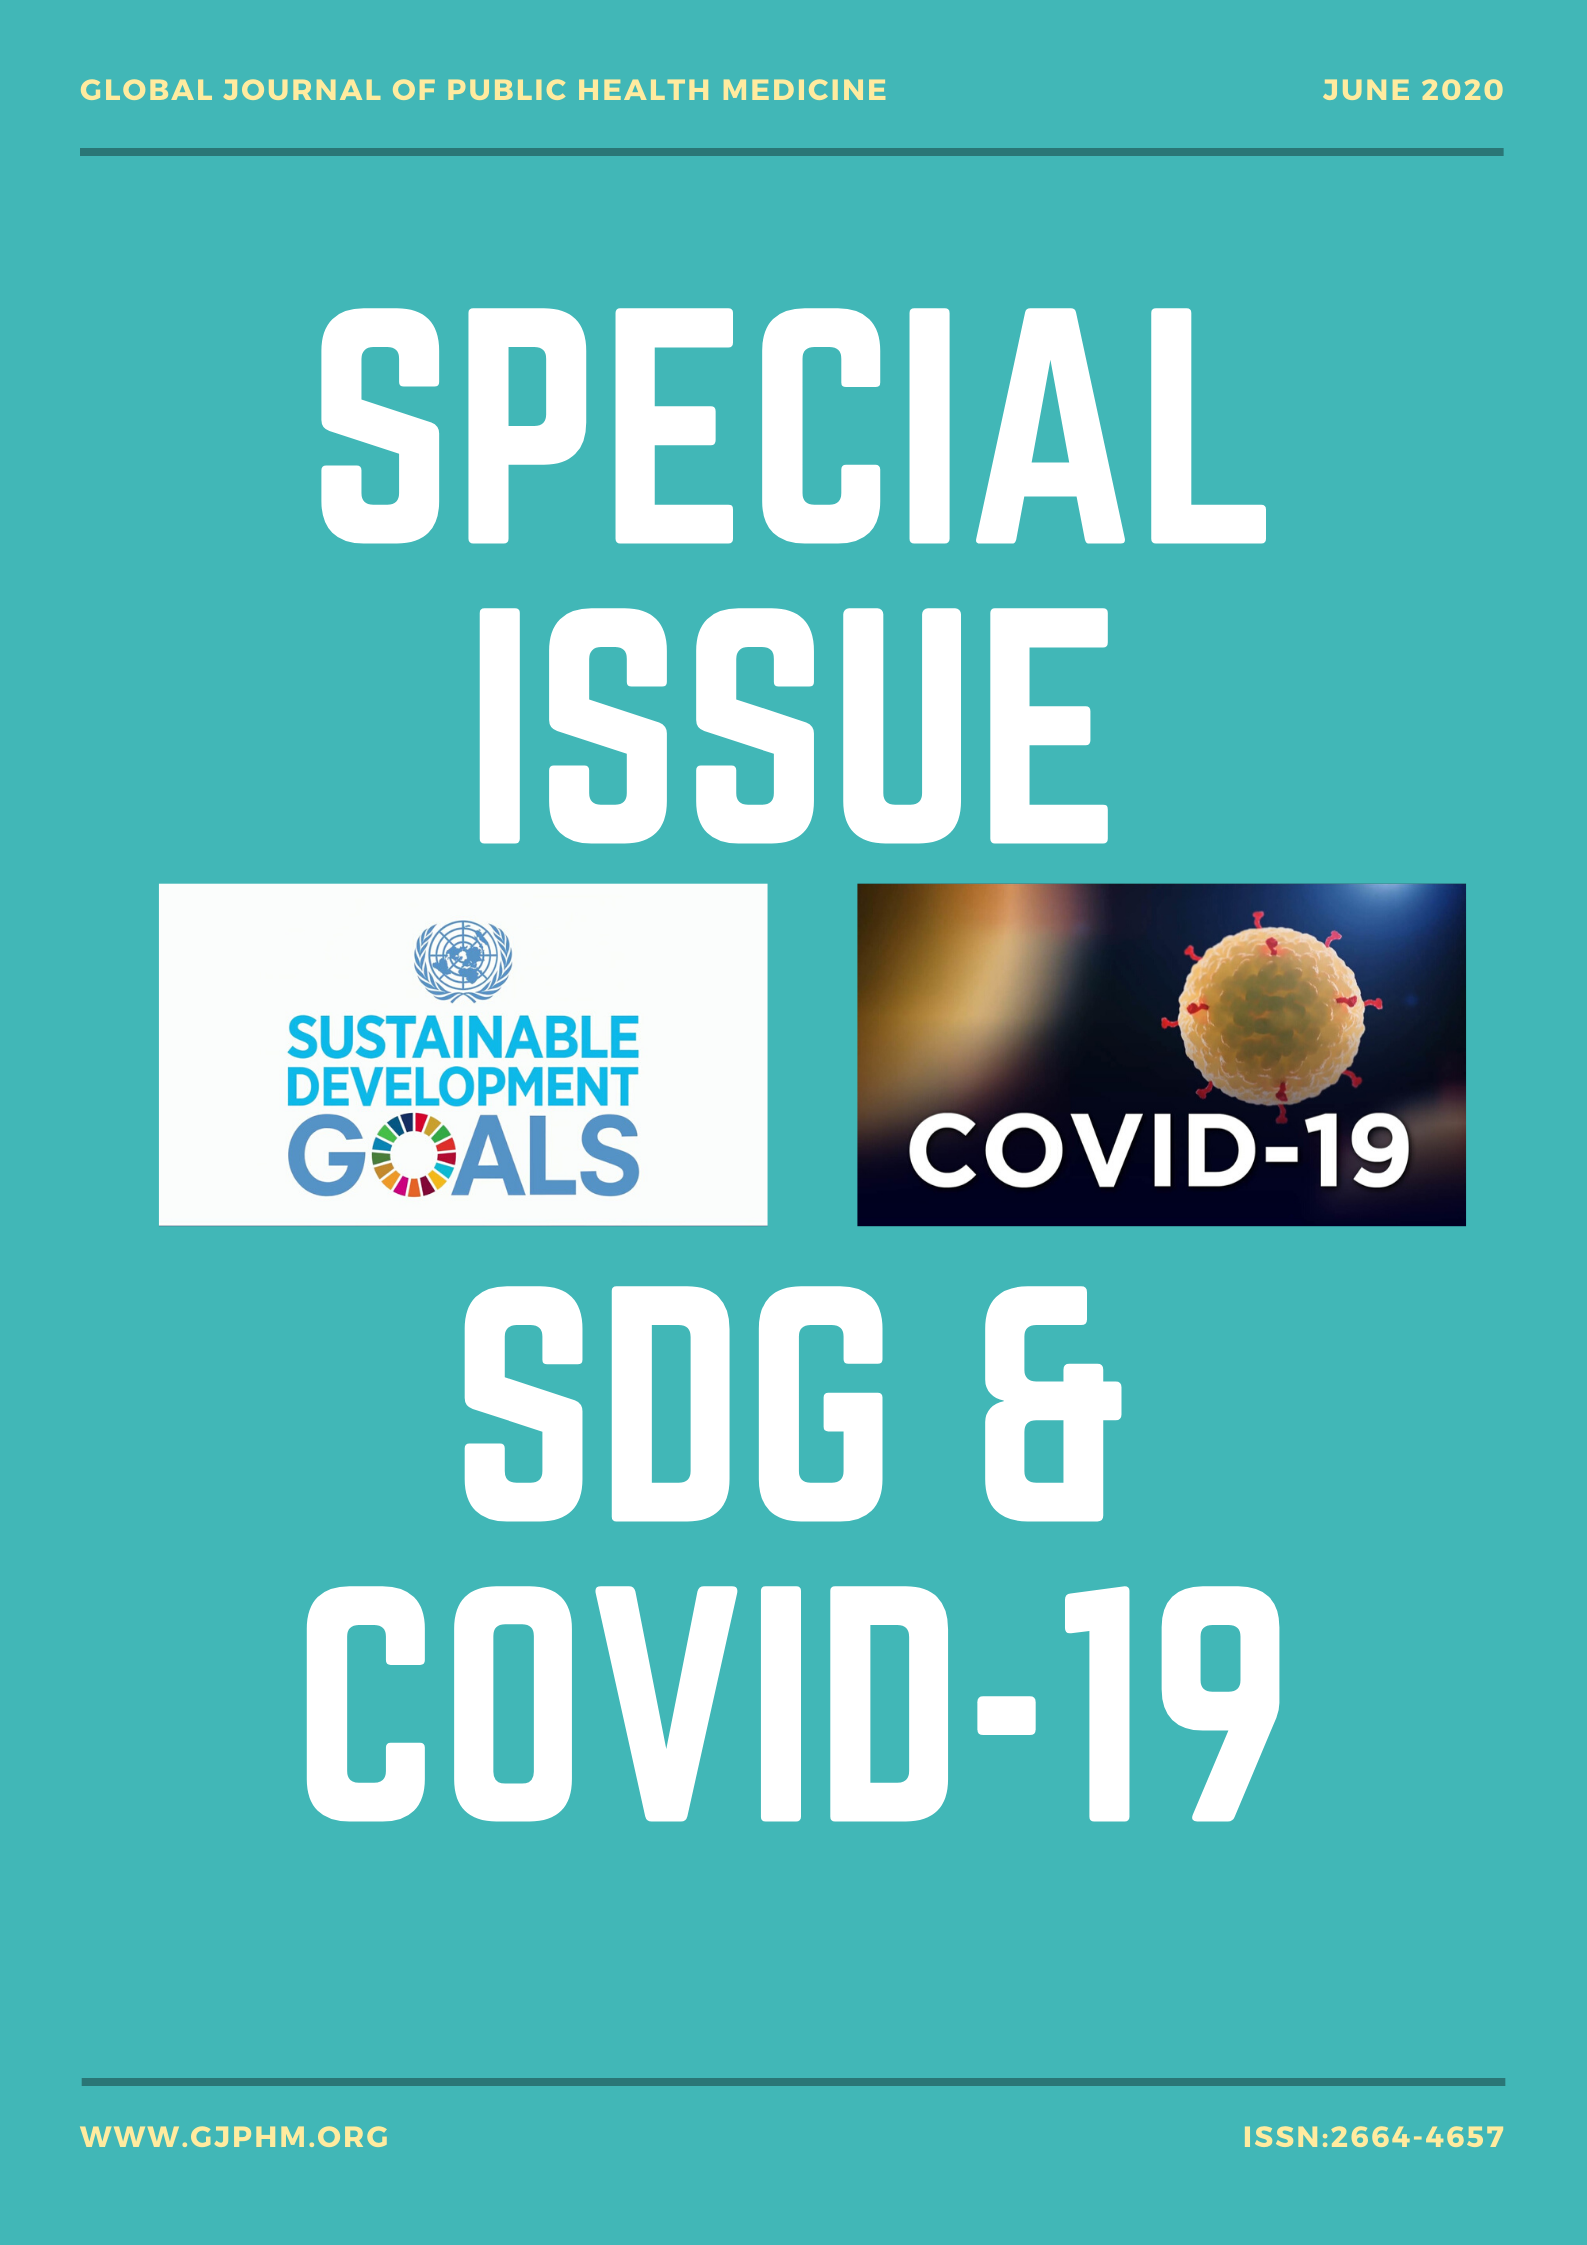 					View 2020: Special Issue on SDG & COVID-19
				